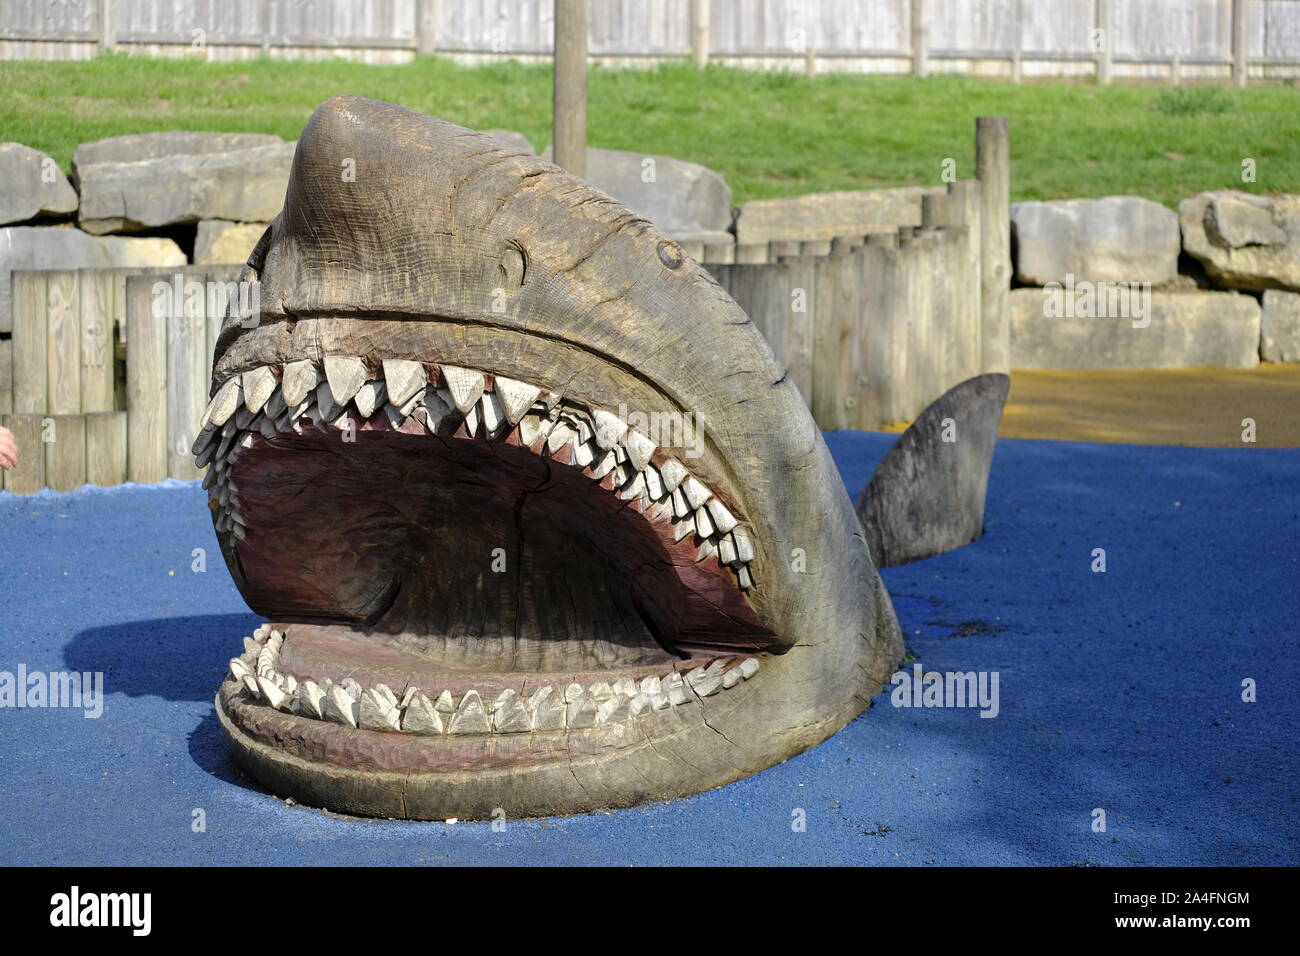 Marwell Zoo, Hampshire, England, UK. Large wooden Shark sculptures in children's play area at Marwell Zoo Stock Photo